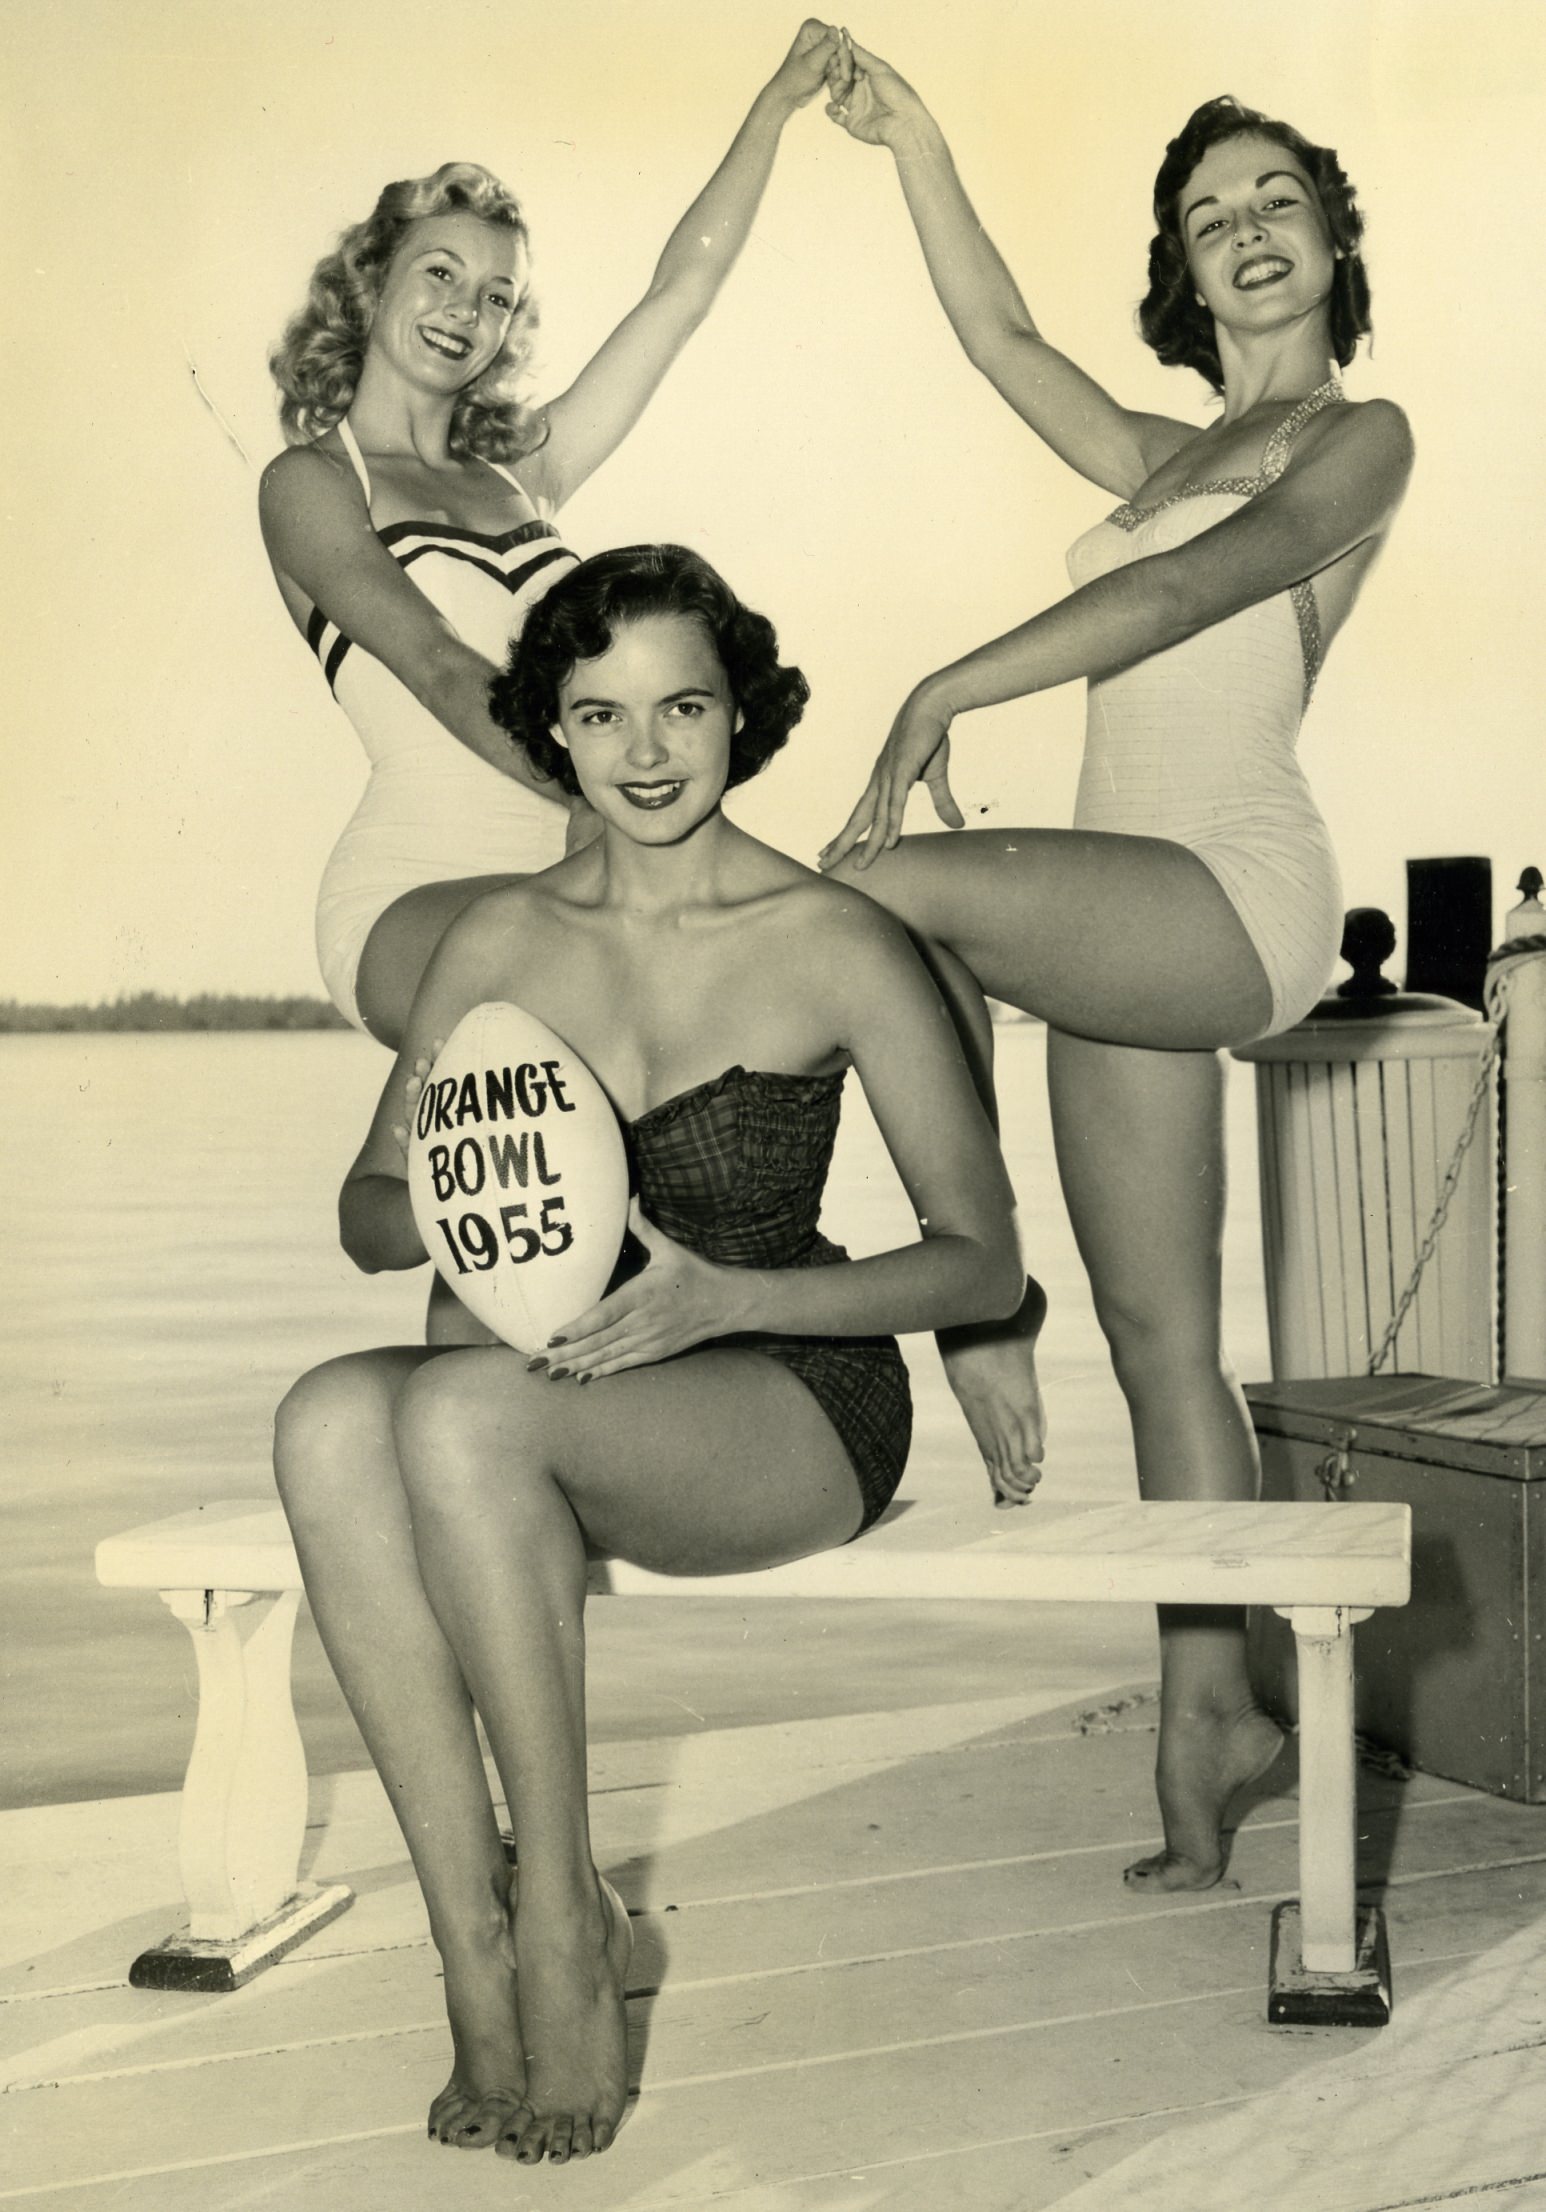 University of Floridas first homecoming queen (1953) Carolyn Stroupe (center) and the next 2 queens promote the Orange Bowl in Florida, US in 1955.